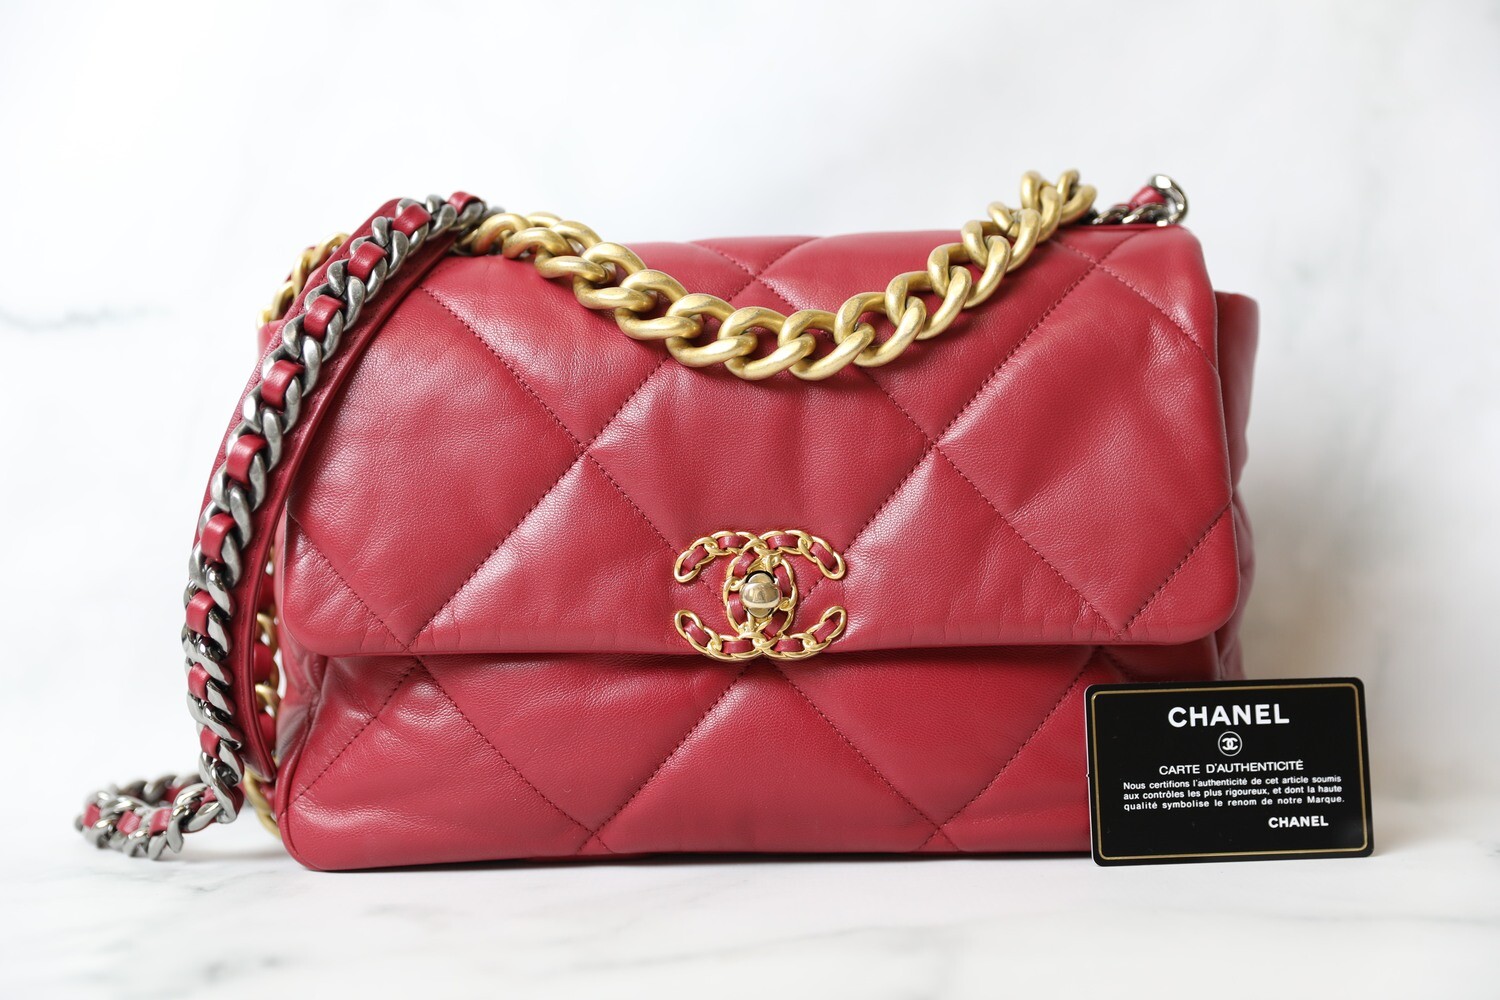 Chanel 19 Large, Red, Preowned in Box WA001 - Julia Rose Boston